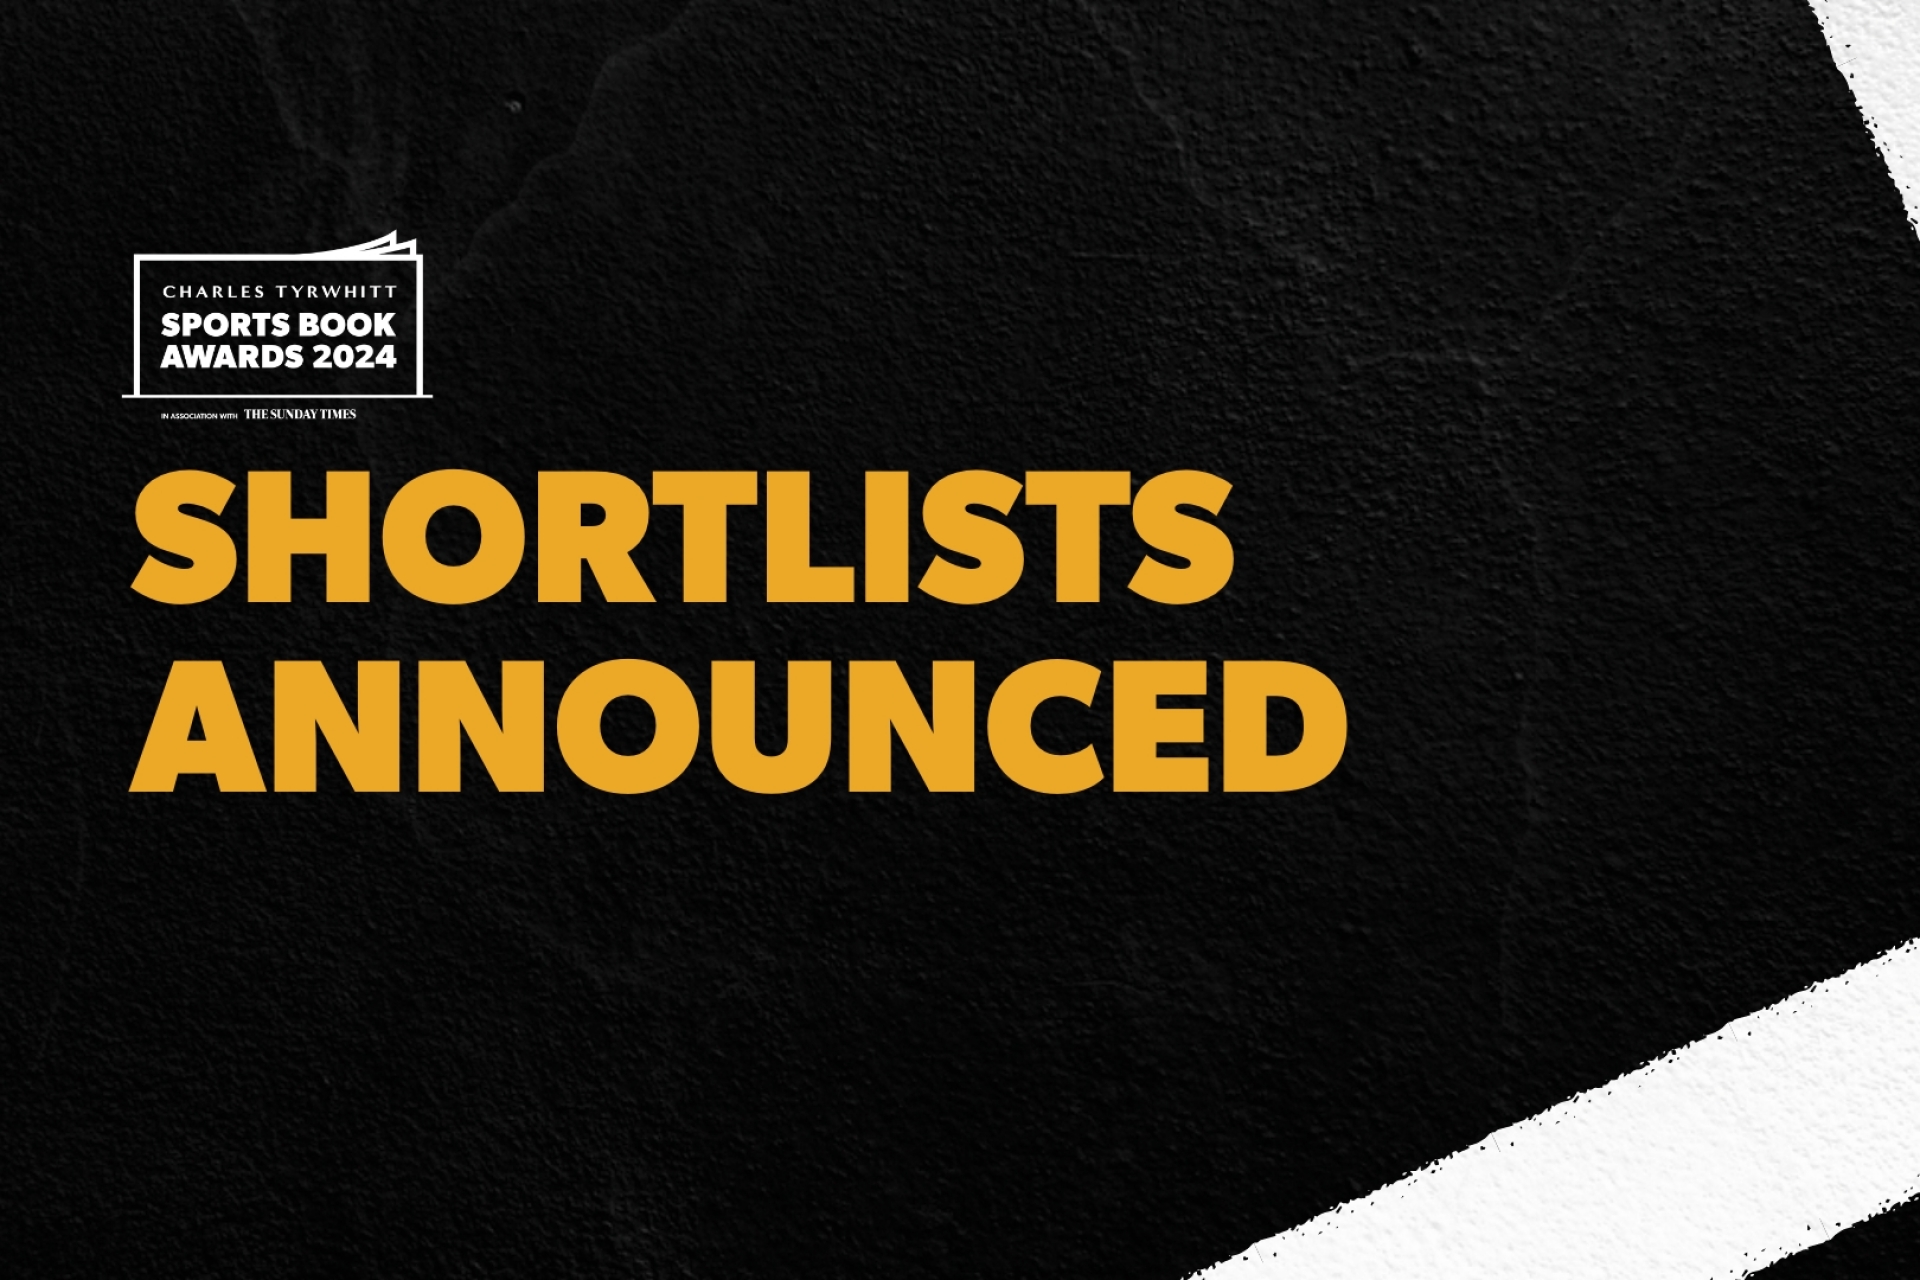 Shorlist Announced for 2024 Charles Tyrwhitt Sports Book Awards in Association with The Sunday Times.